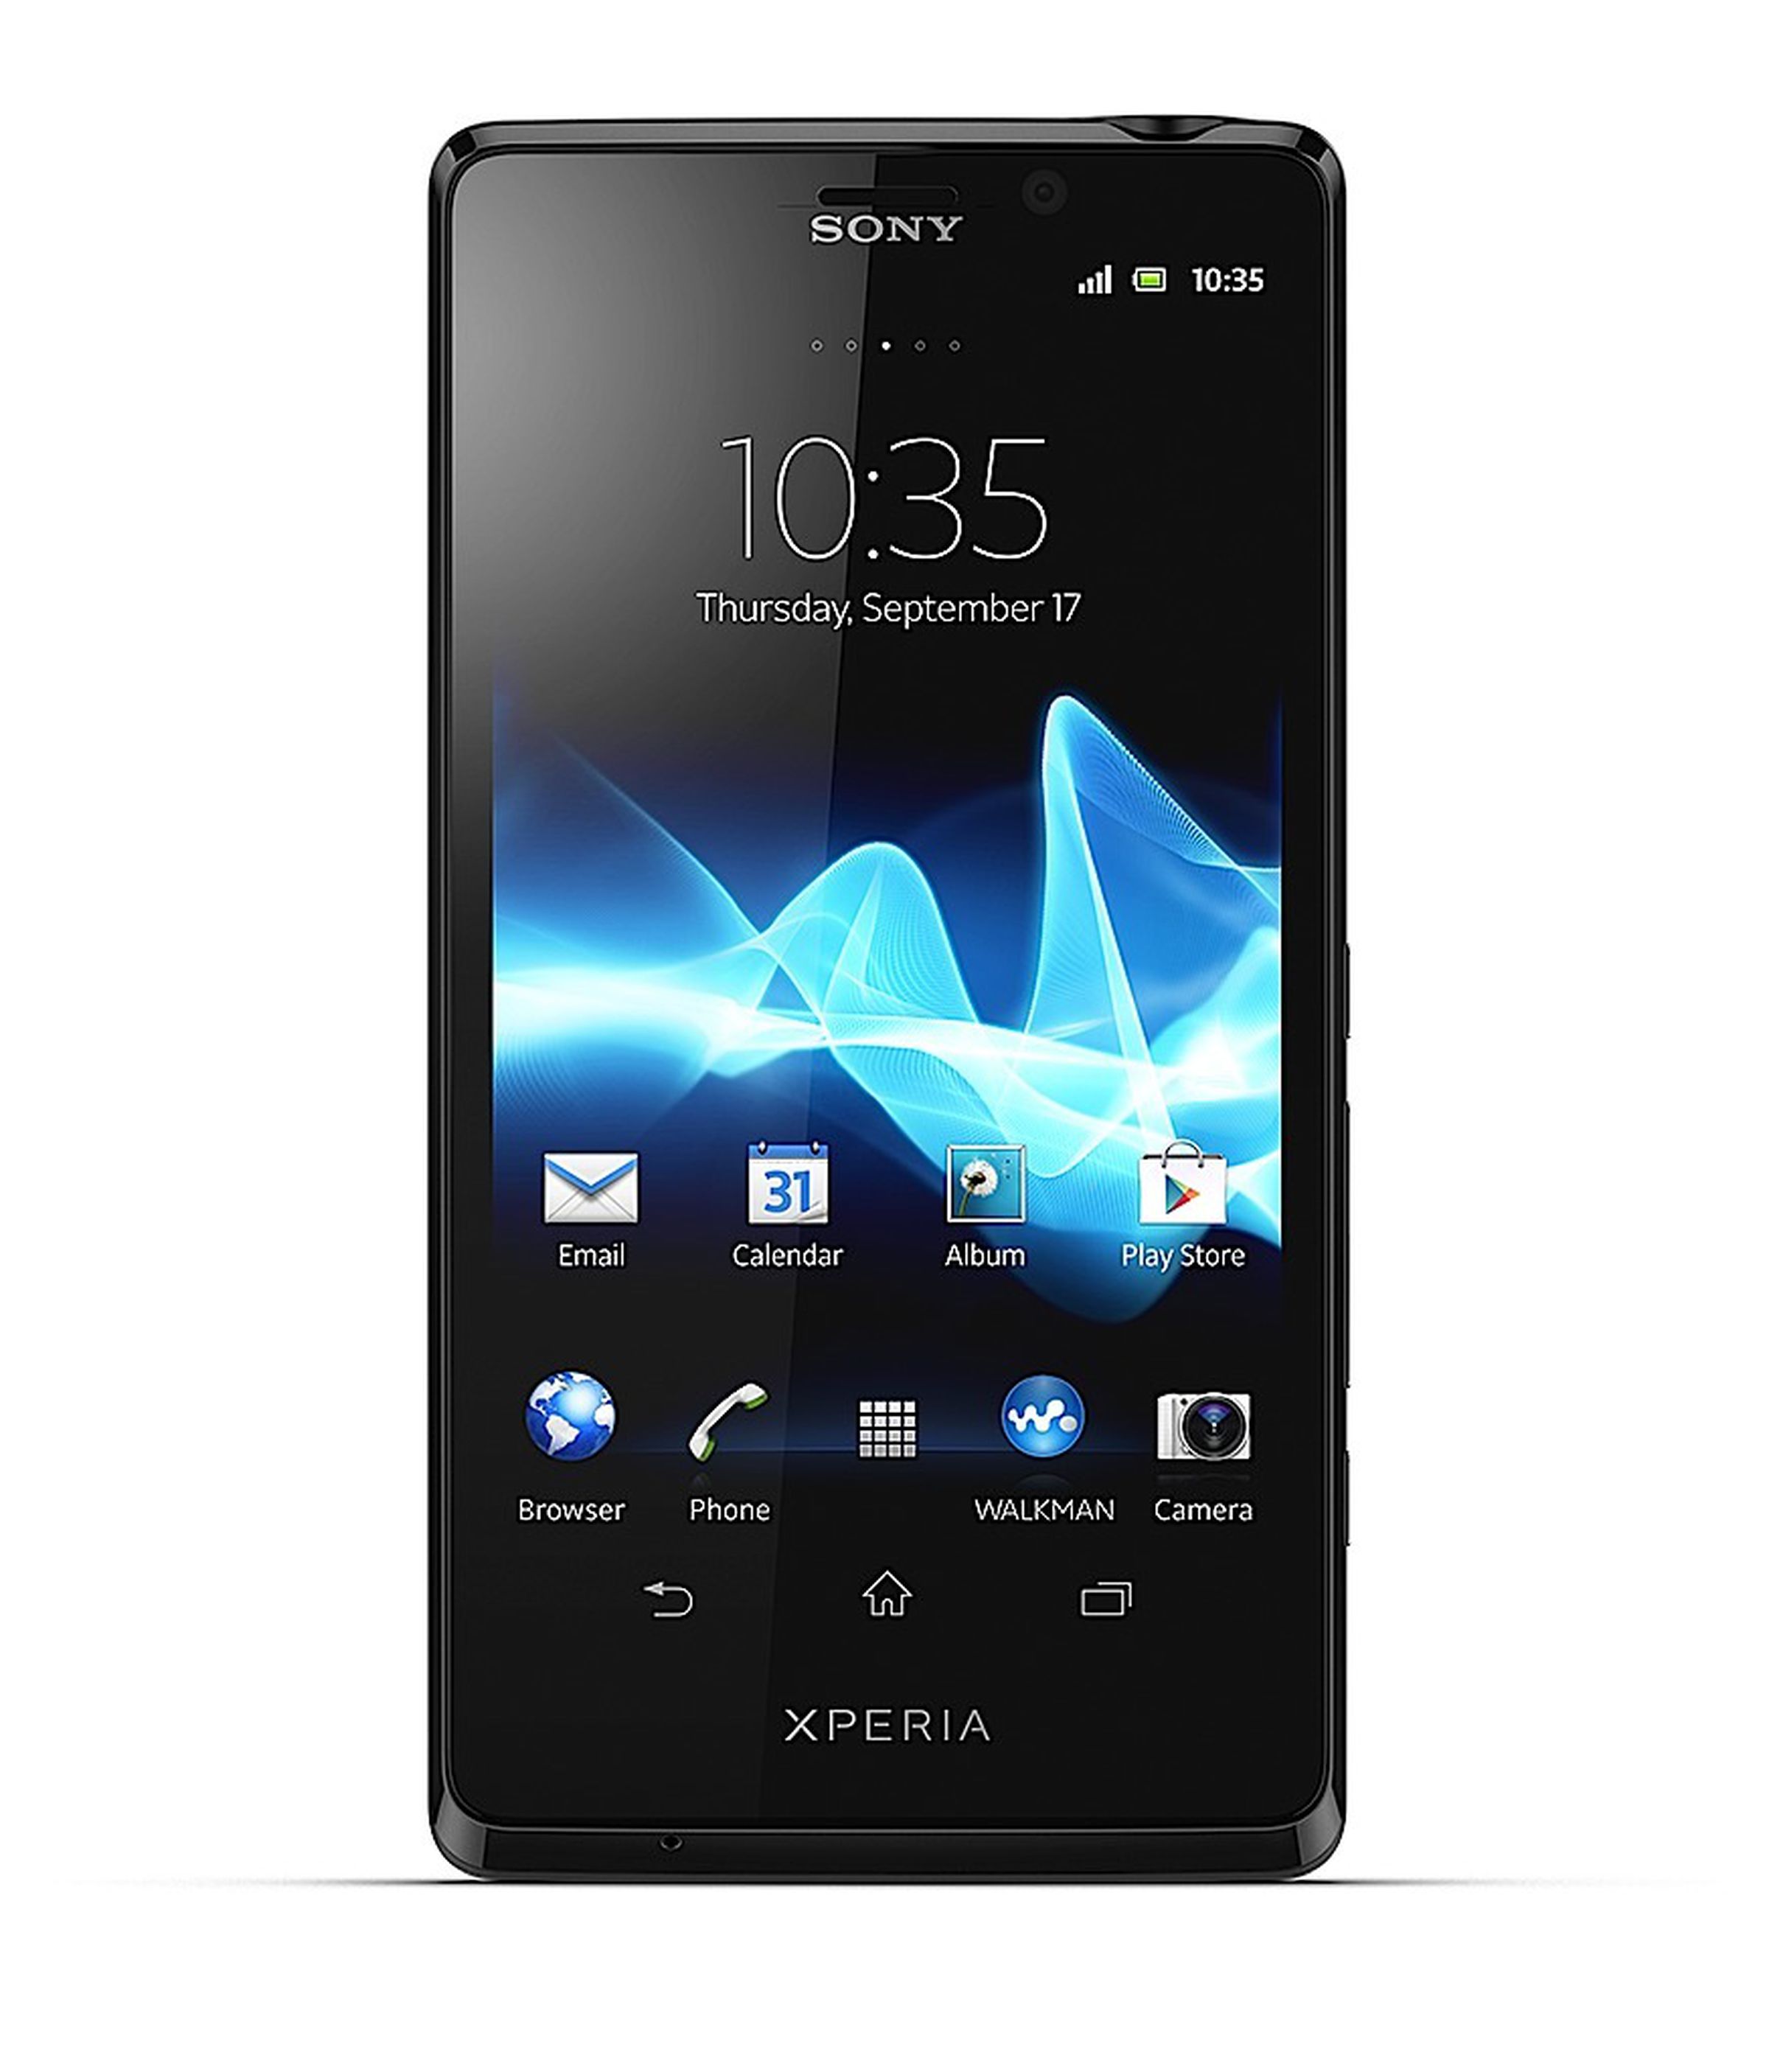 Sony Xperia T, V, and J smartphones